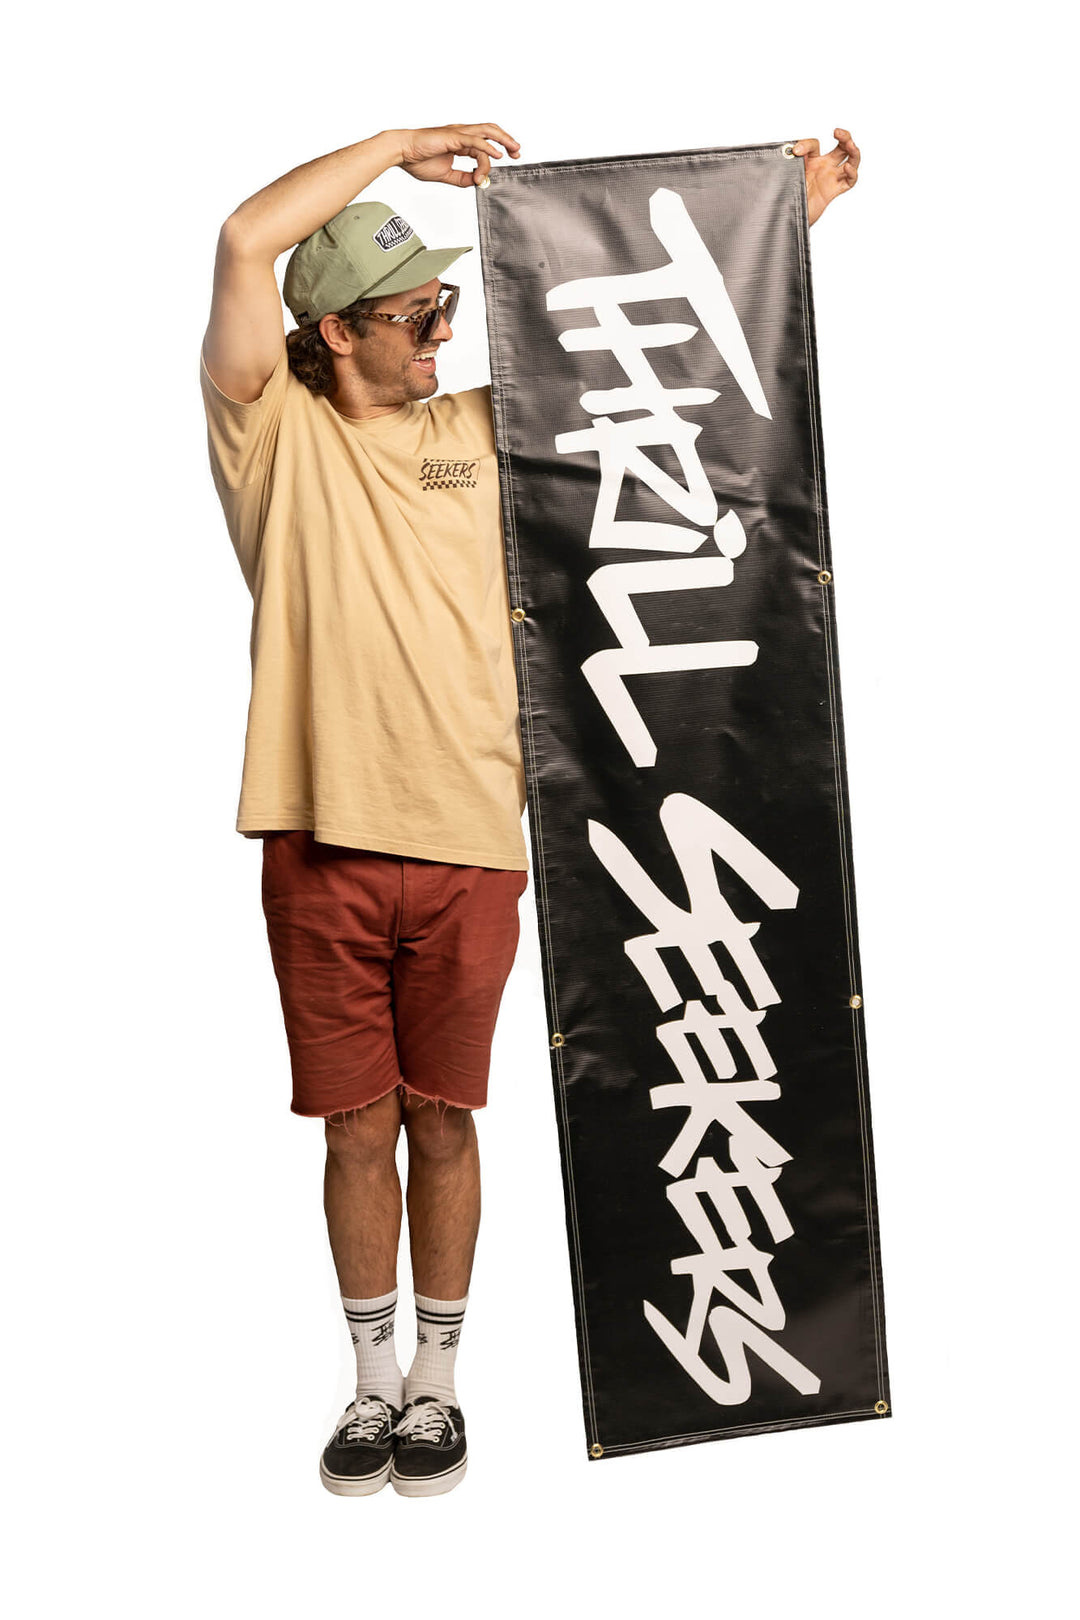 Thrill Seekers 6' Logo Banner